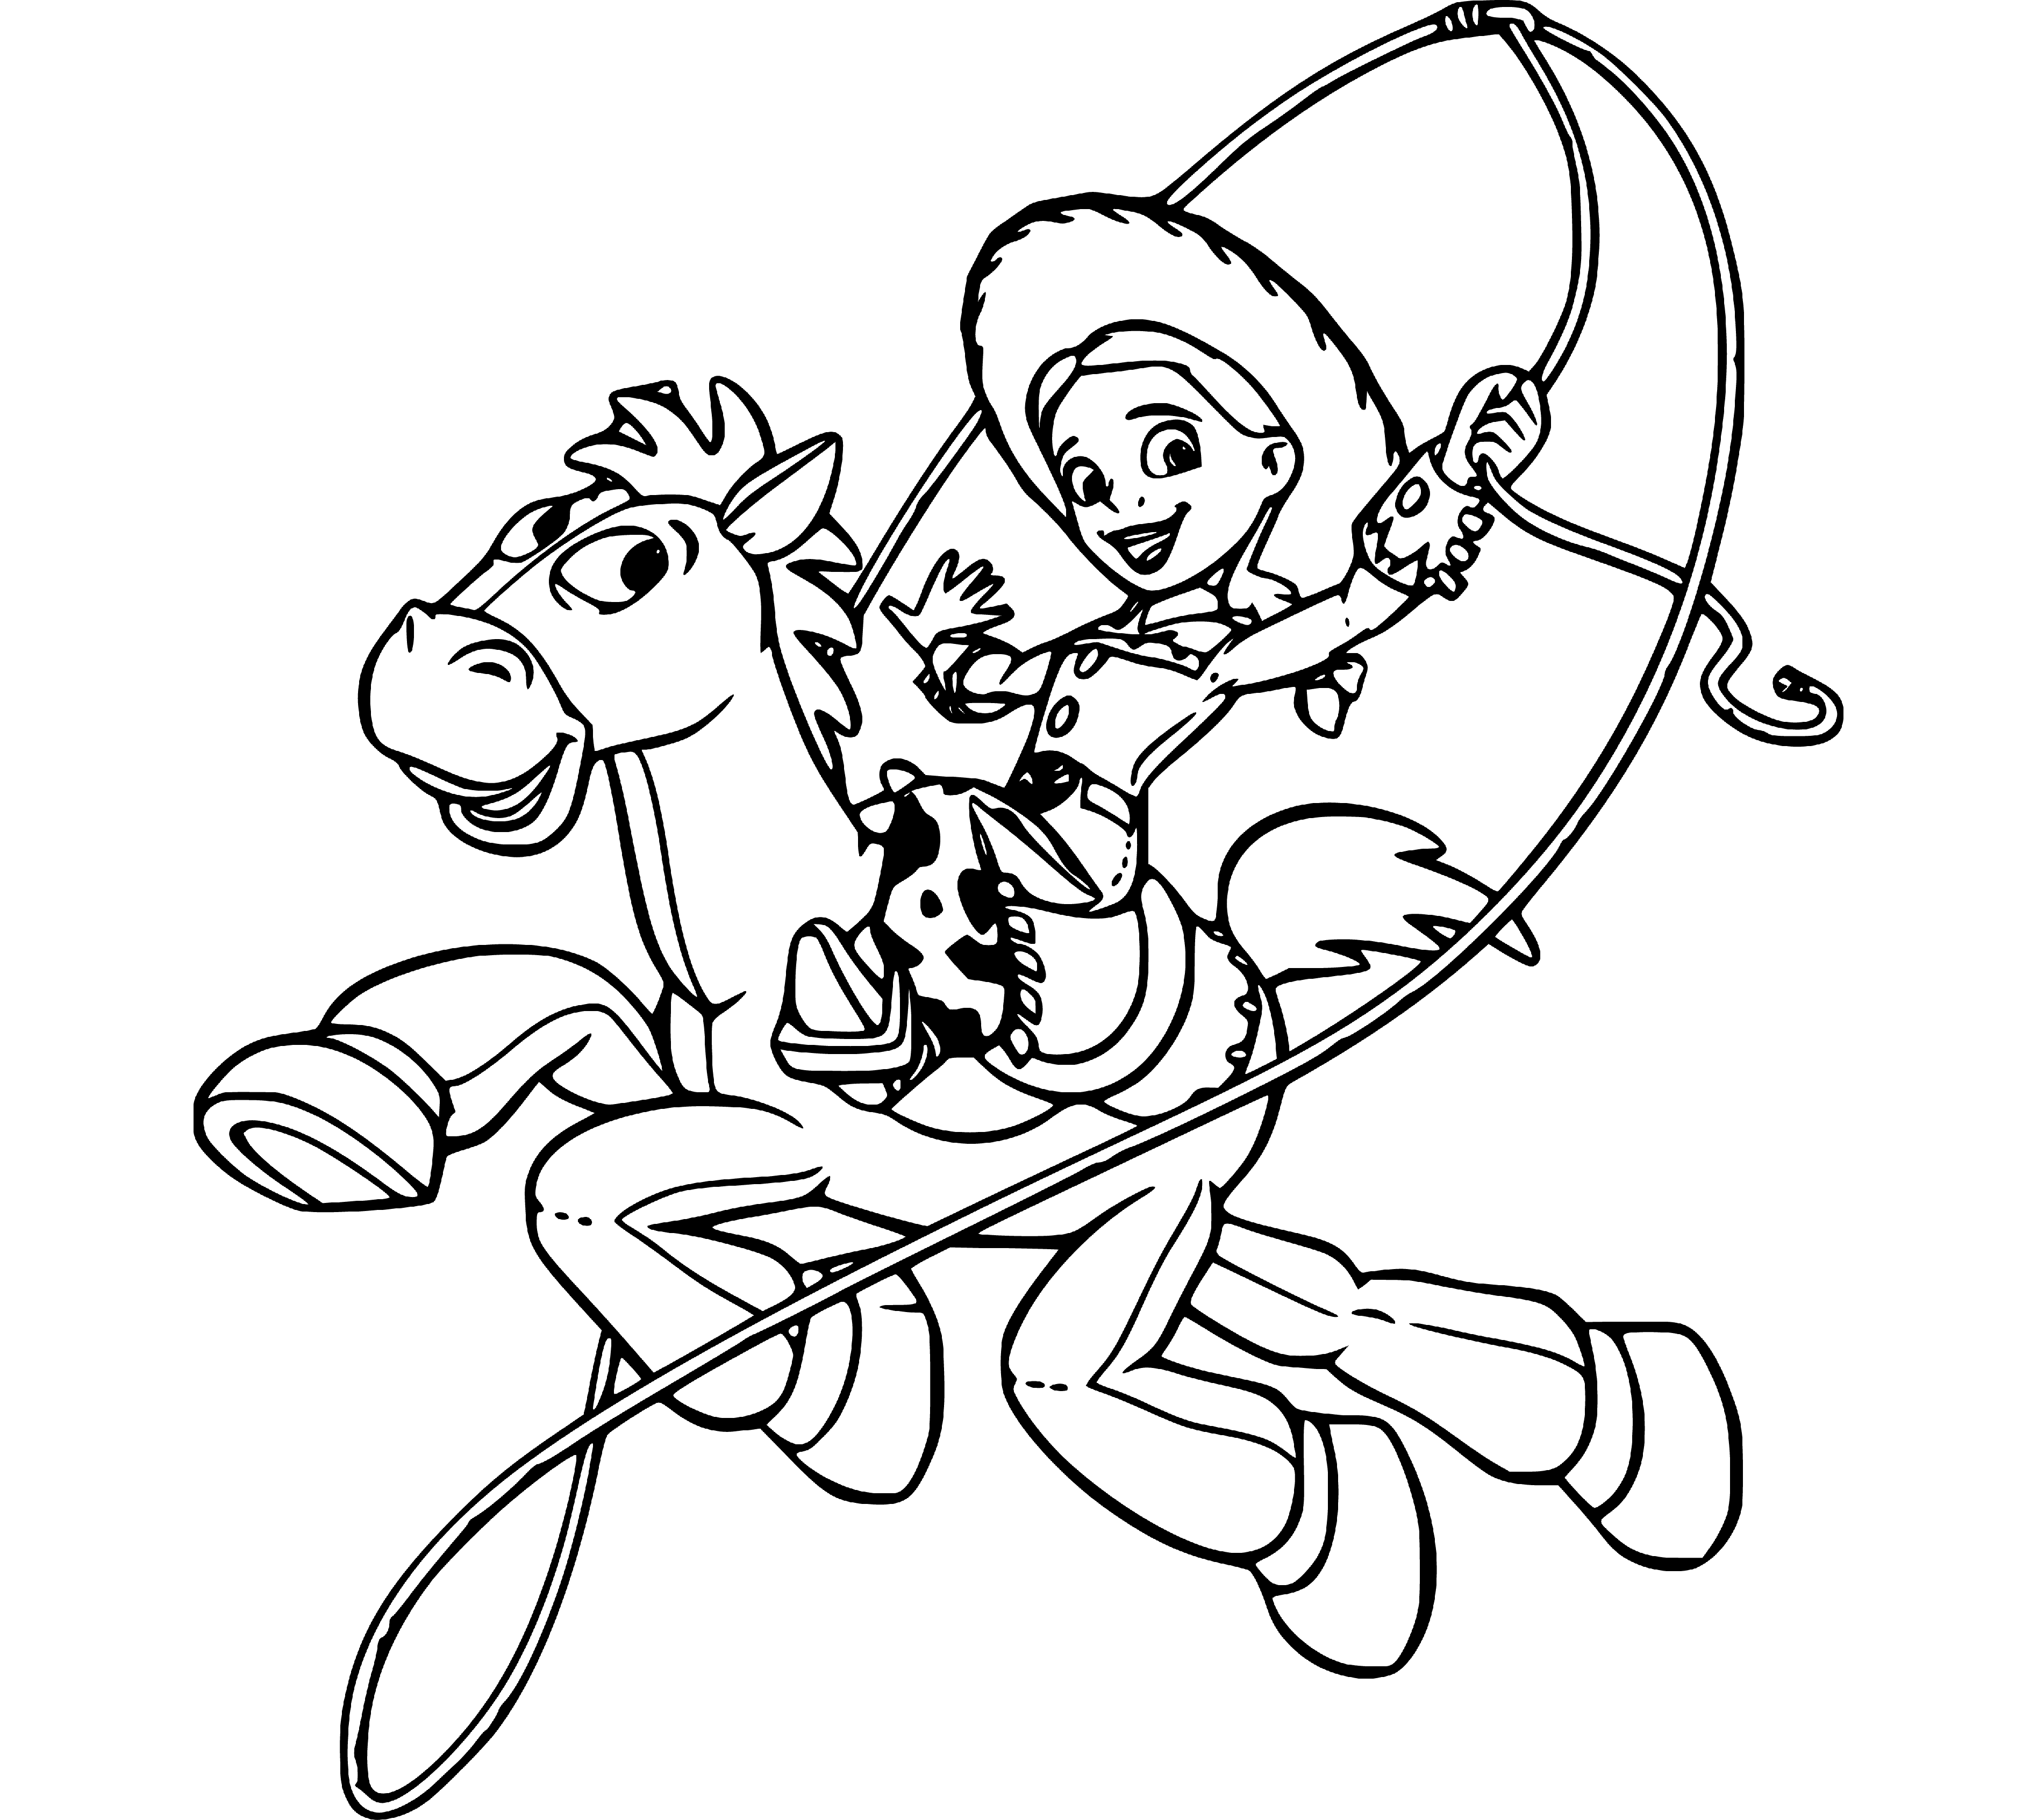 Printable Jessie riding a horse Coloring Page for kids.